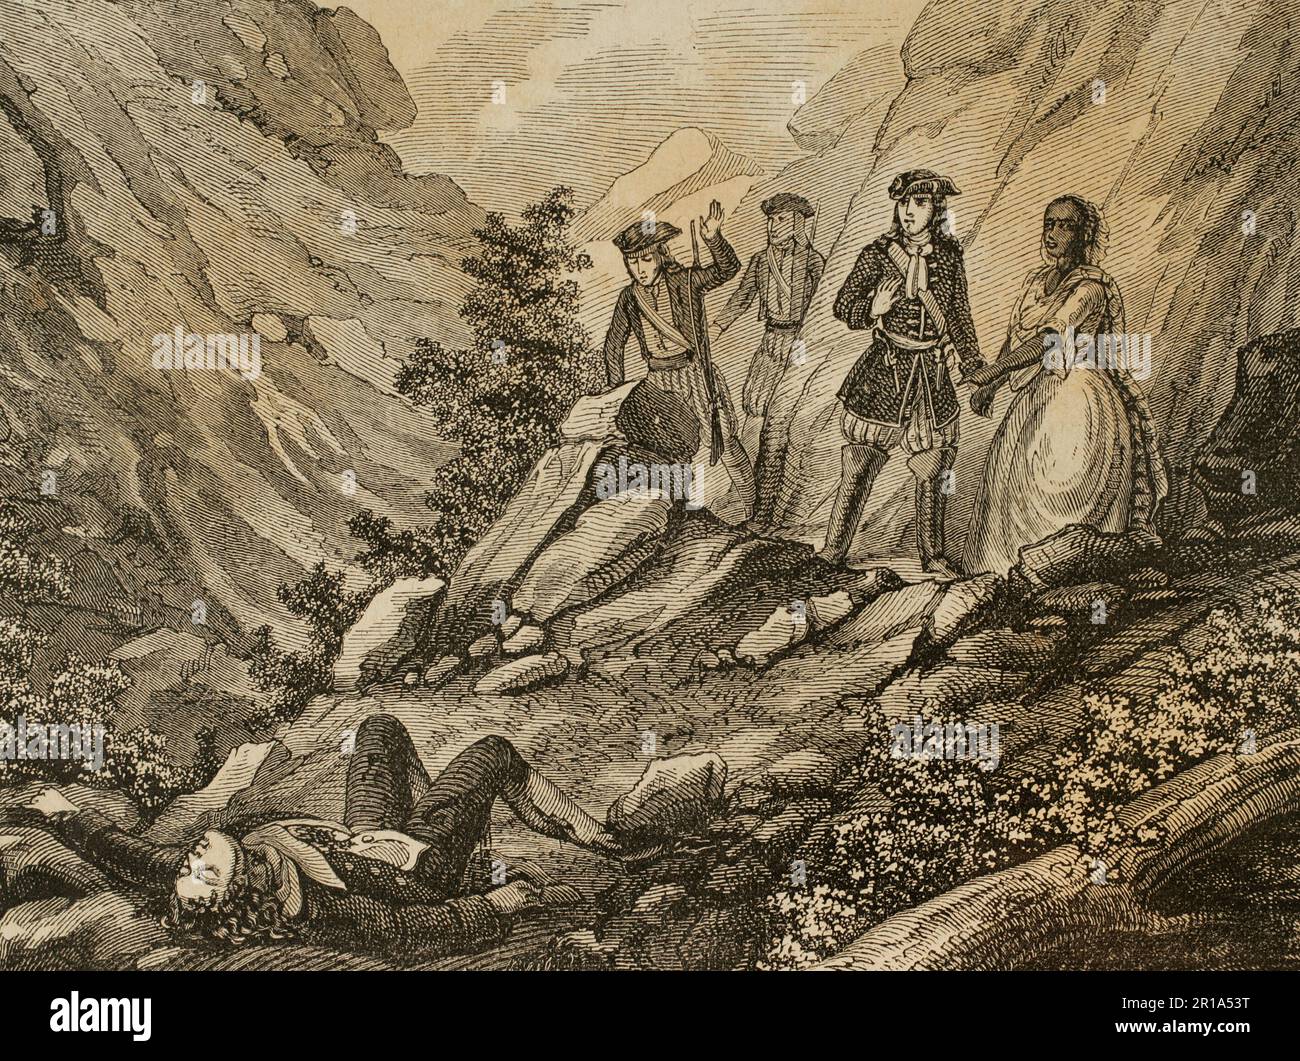 History of the Squadrons of Catalonia. Who has mutilated him so?, said the corporal. Me, answered the black woman, because he was unfaithful to me'. Engraving depicting the corpse of a man found by the agents in a mountain landscape. 'Historia de las Escuadras de Cataluña, intercalada con la vida y hechos de los más célebres ladrones y bandoleros' (History of the Squadrons of Catalonia, interspersed with the life and facts of the most famous thieves and bandits). By José Ortega y Espinós (1815-1876). Barcelona, 1876. Stock Photo